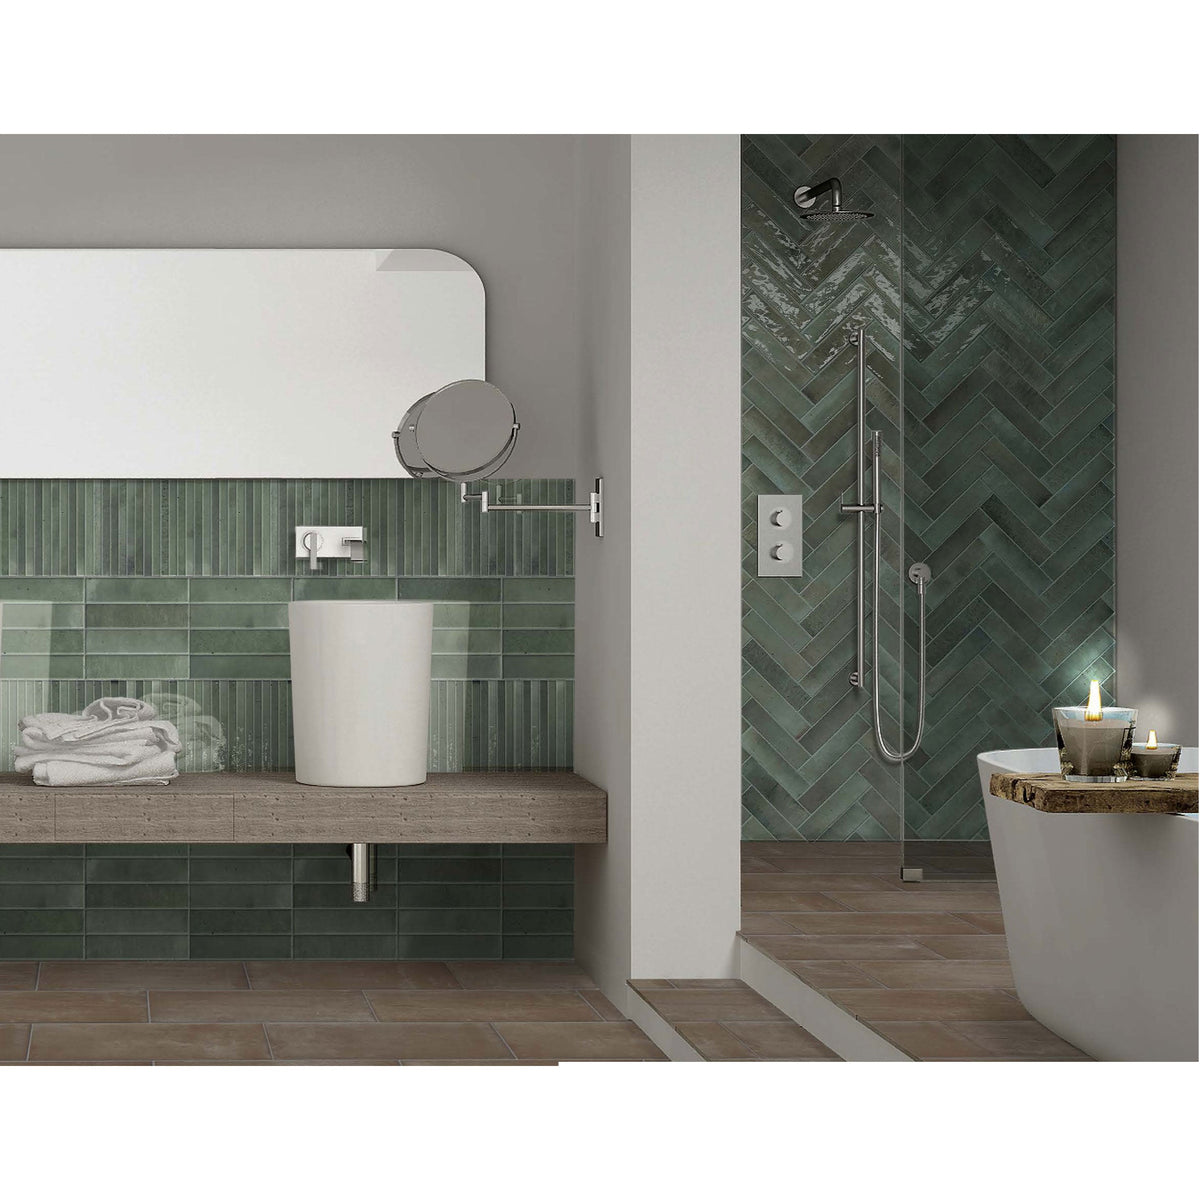 Cobsa - Homey Series 3 in. x 10 in. Porcelain Subway Tile - Forest Bathroom Install